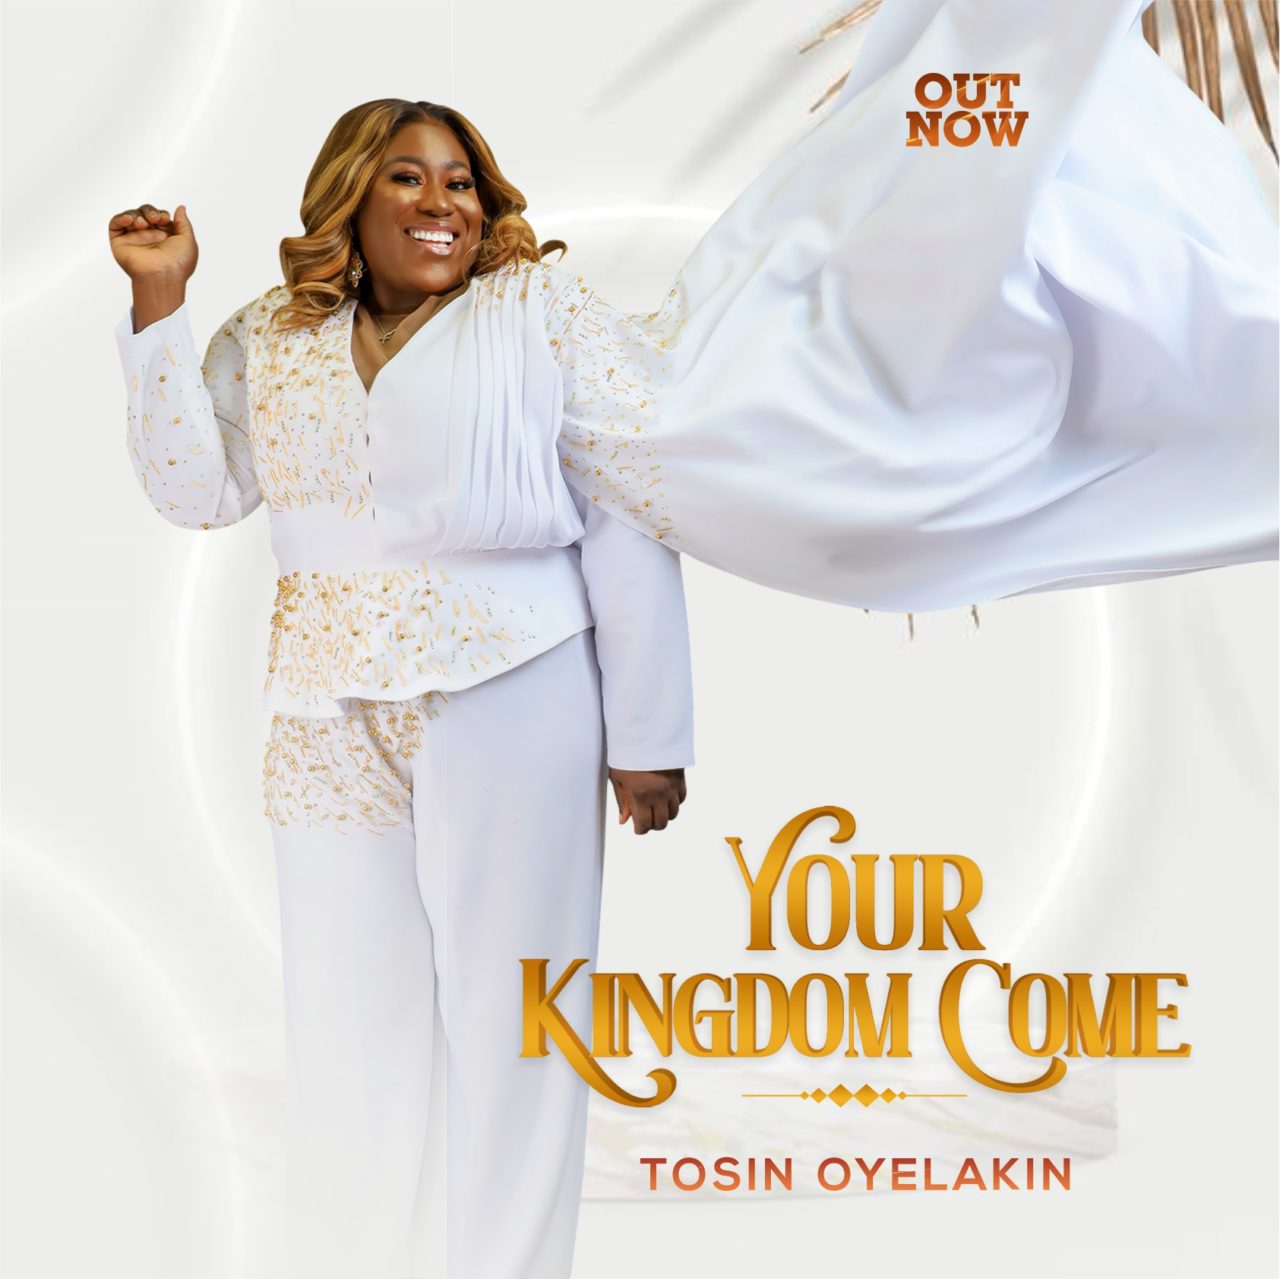 YOUR KINGDOM COME OUT NOW